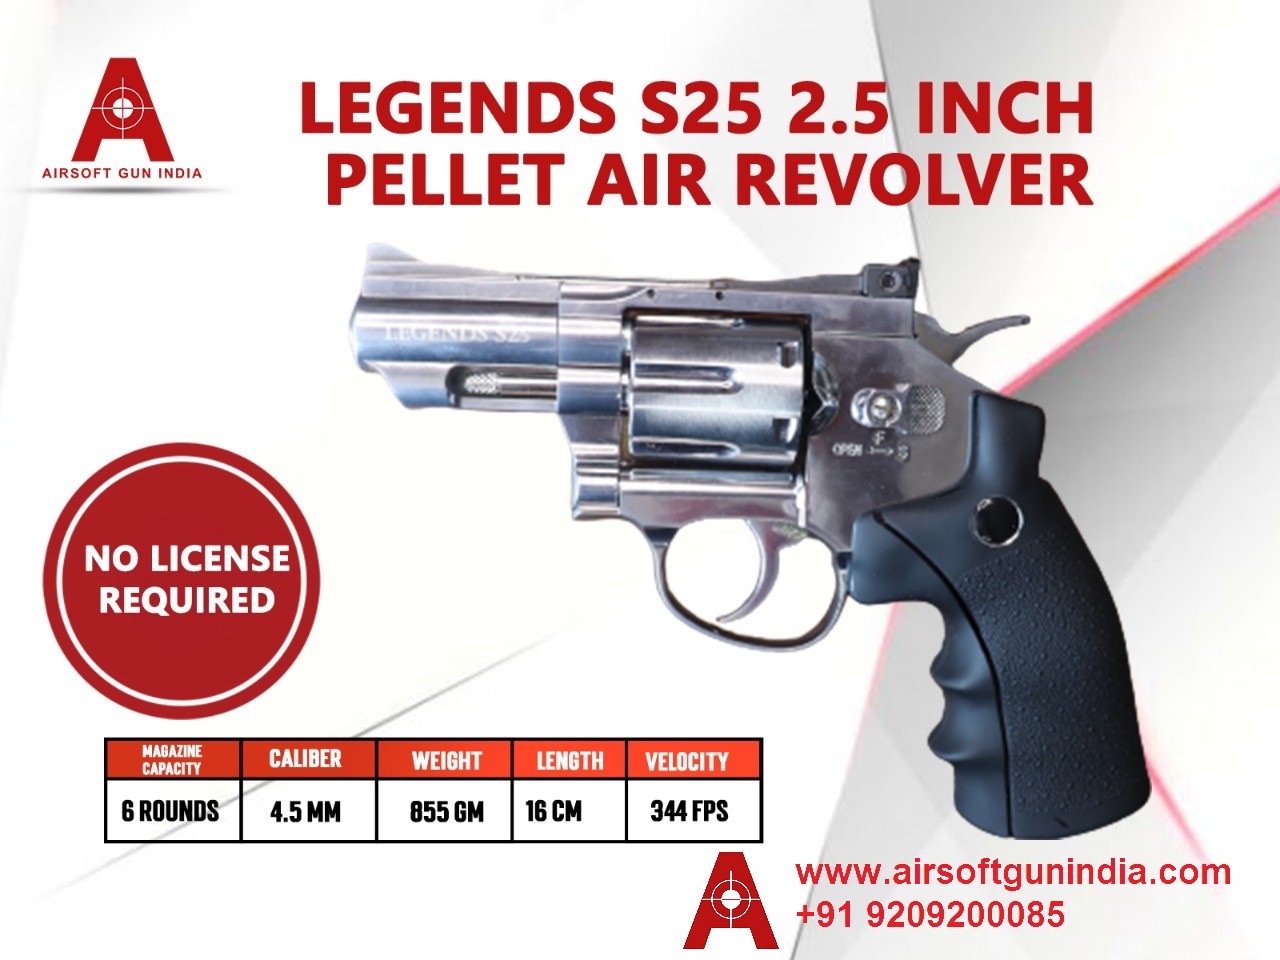 Legends S25 2.5 Inch Co2 Pellets .177Cal, 4.5mm Air Revolver By Airsoft Gun India